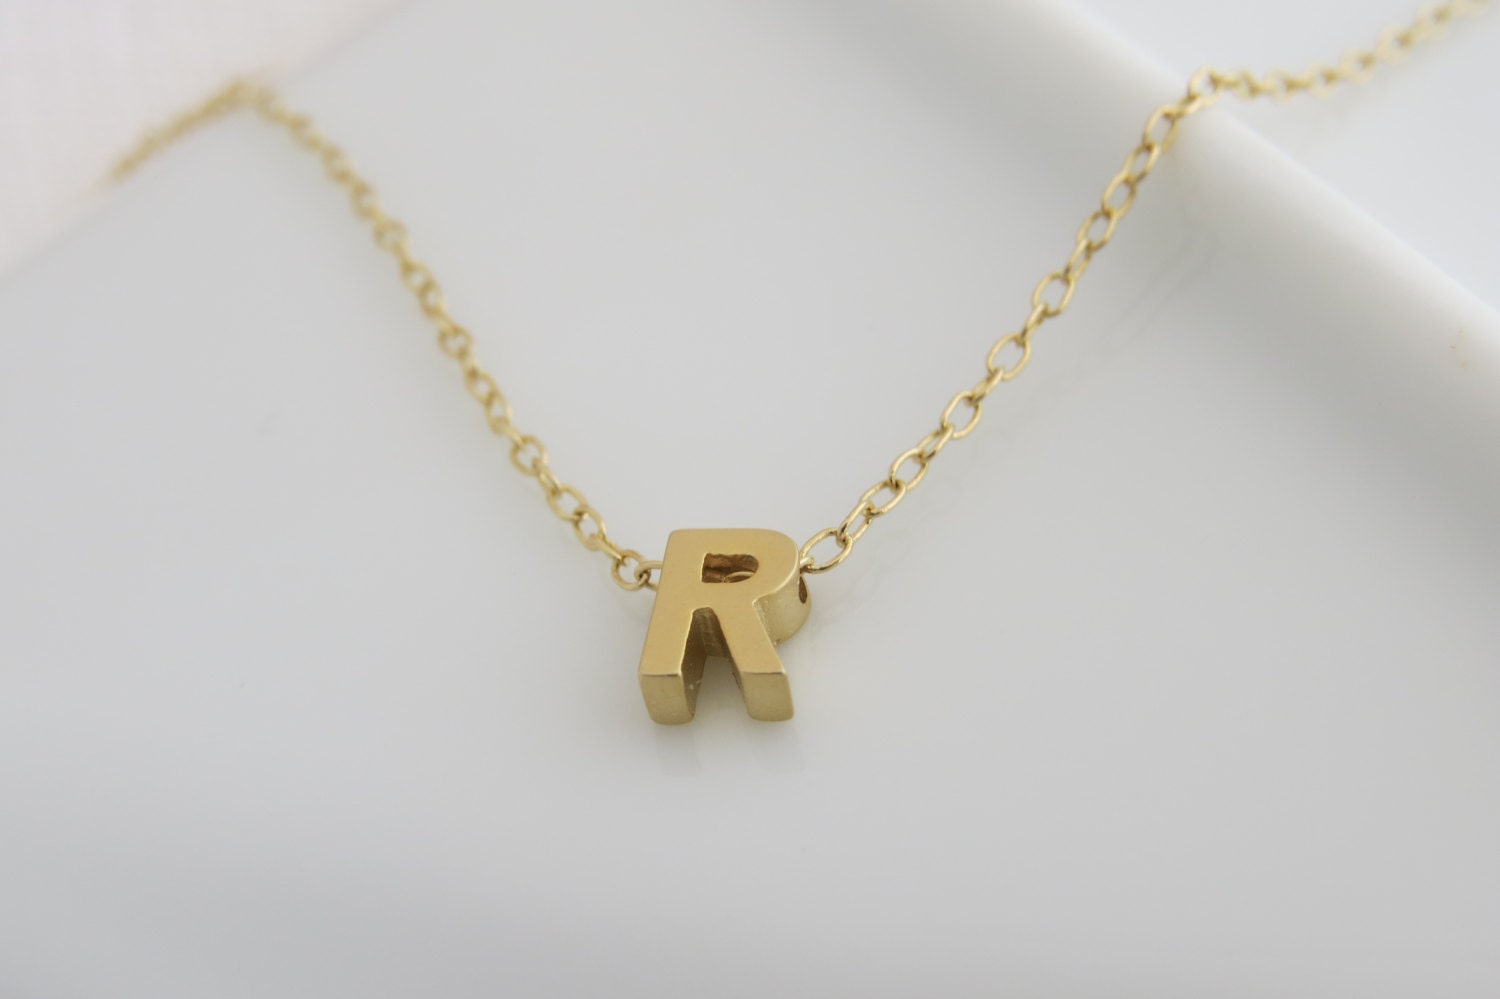 Gold Initial Necklace - Gold Letter Necklace - Tiny Initial Necklace - Delicate Gold Necklace - Simple Gold Jewelry